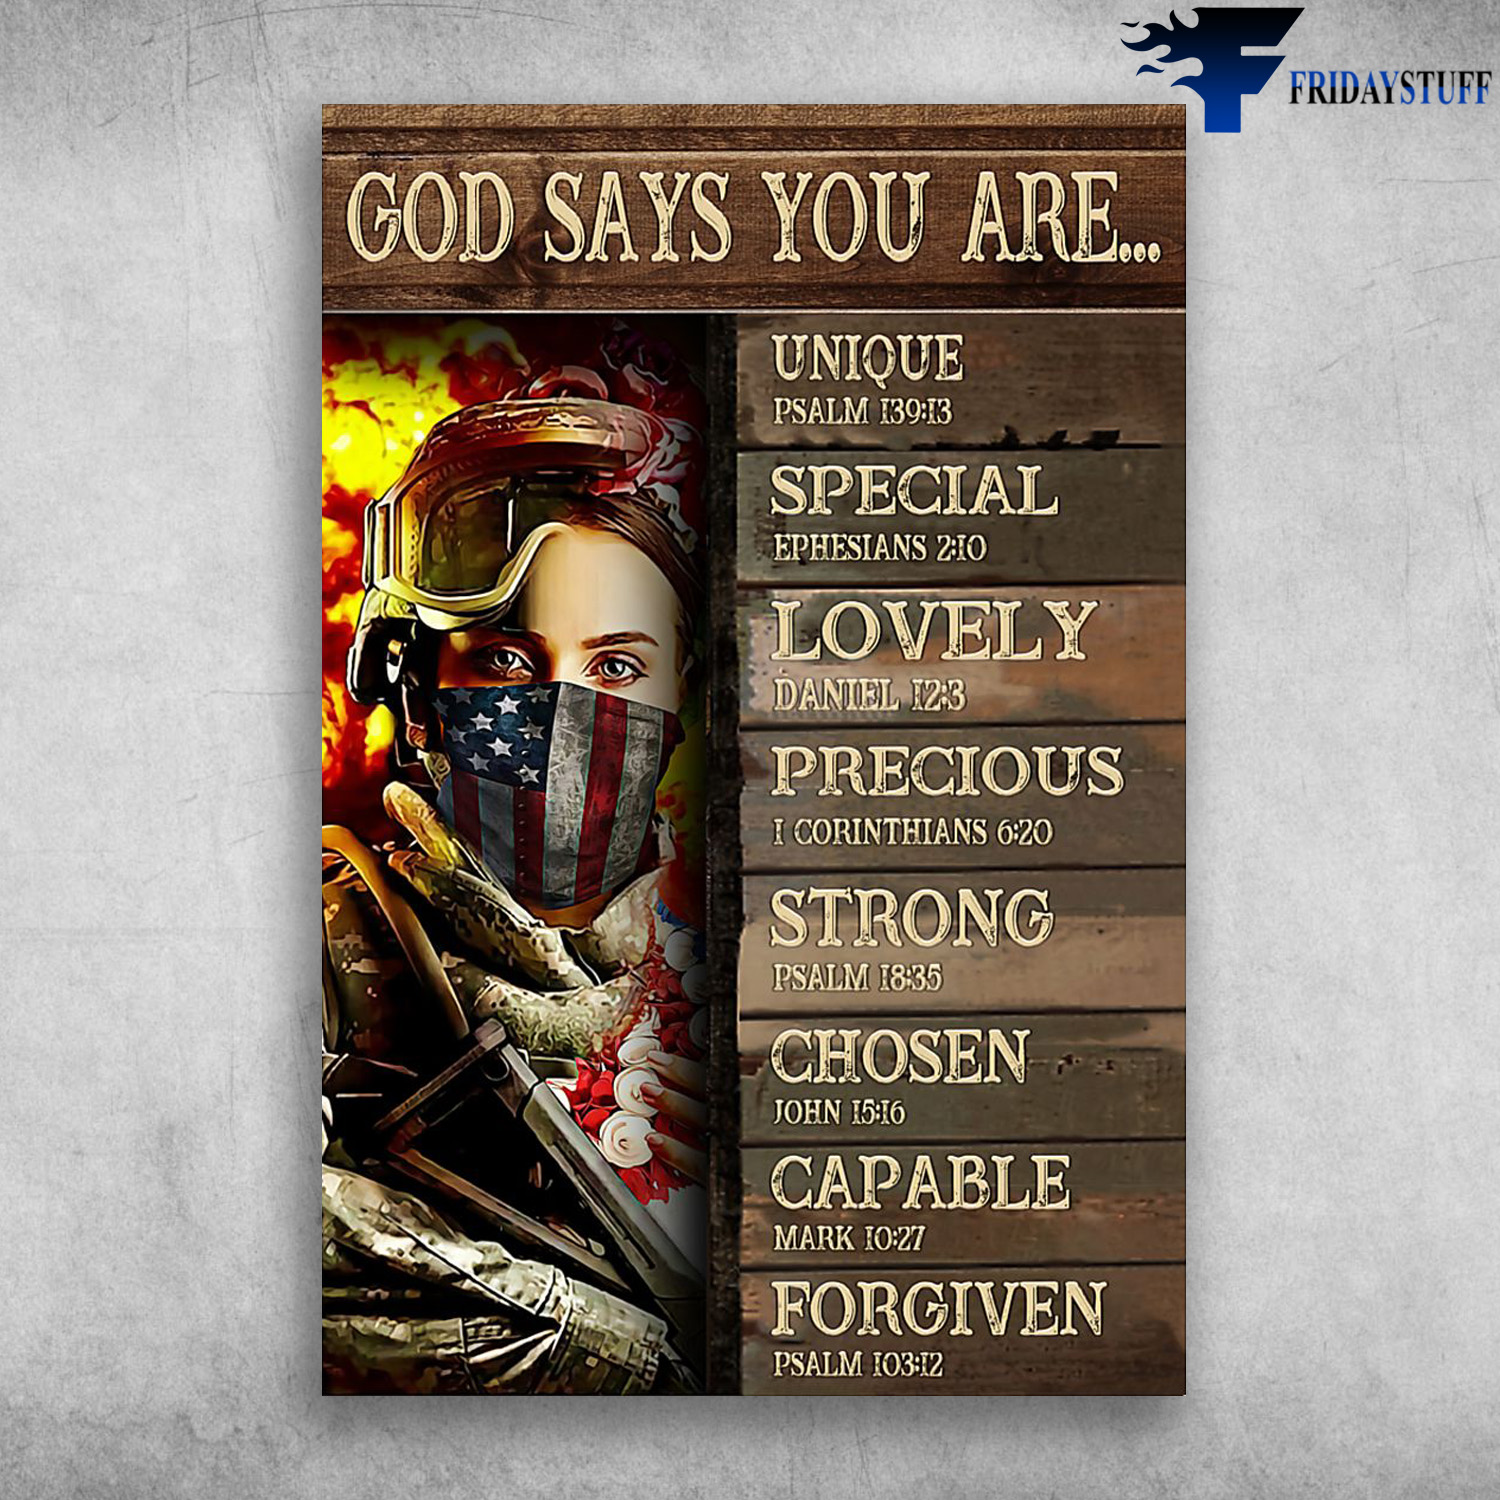 Female Veteran - God Says You Are Unique, Speciall, Lovely Precious, Strong, Chosen, Capable, Forgiven